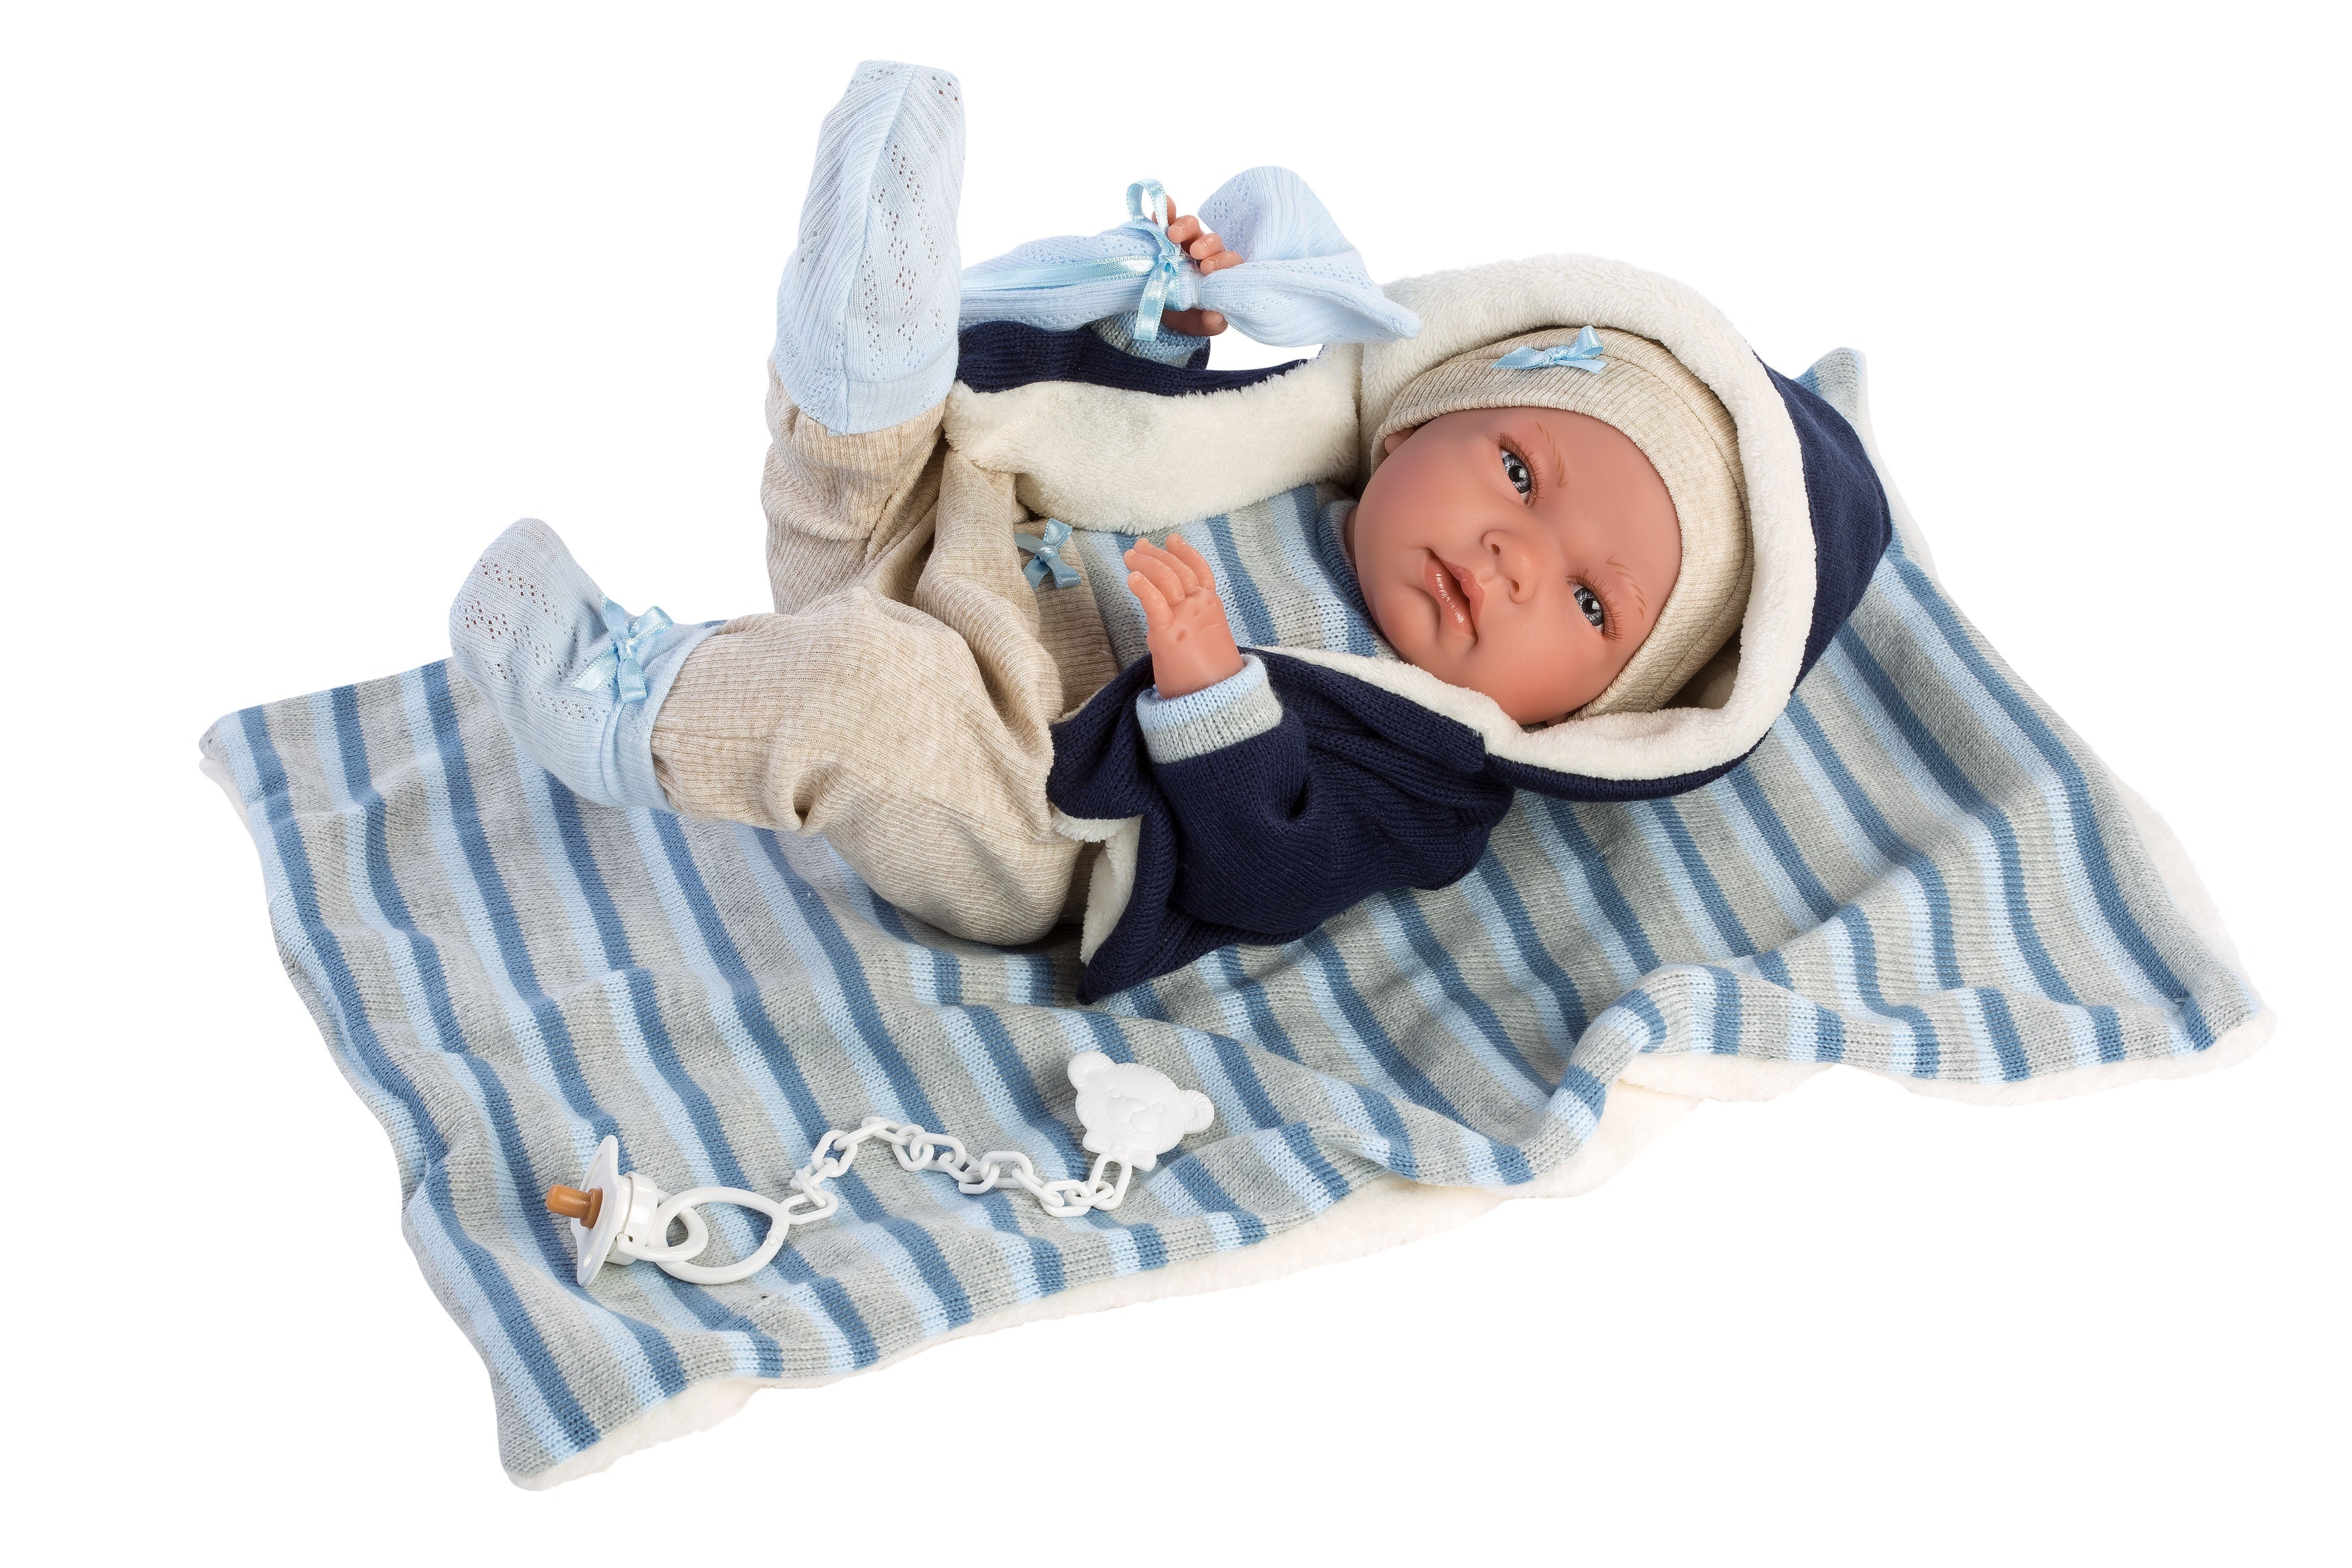 Llorens 15.7" Anatomically-correct Baby Doll Tim With Blanket Dolls